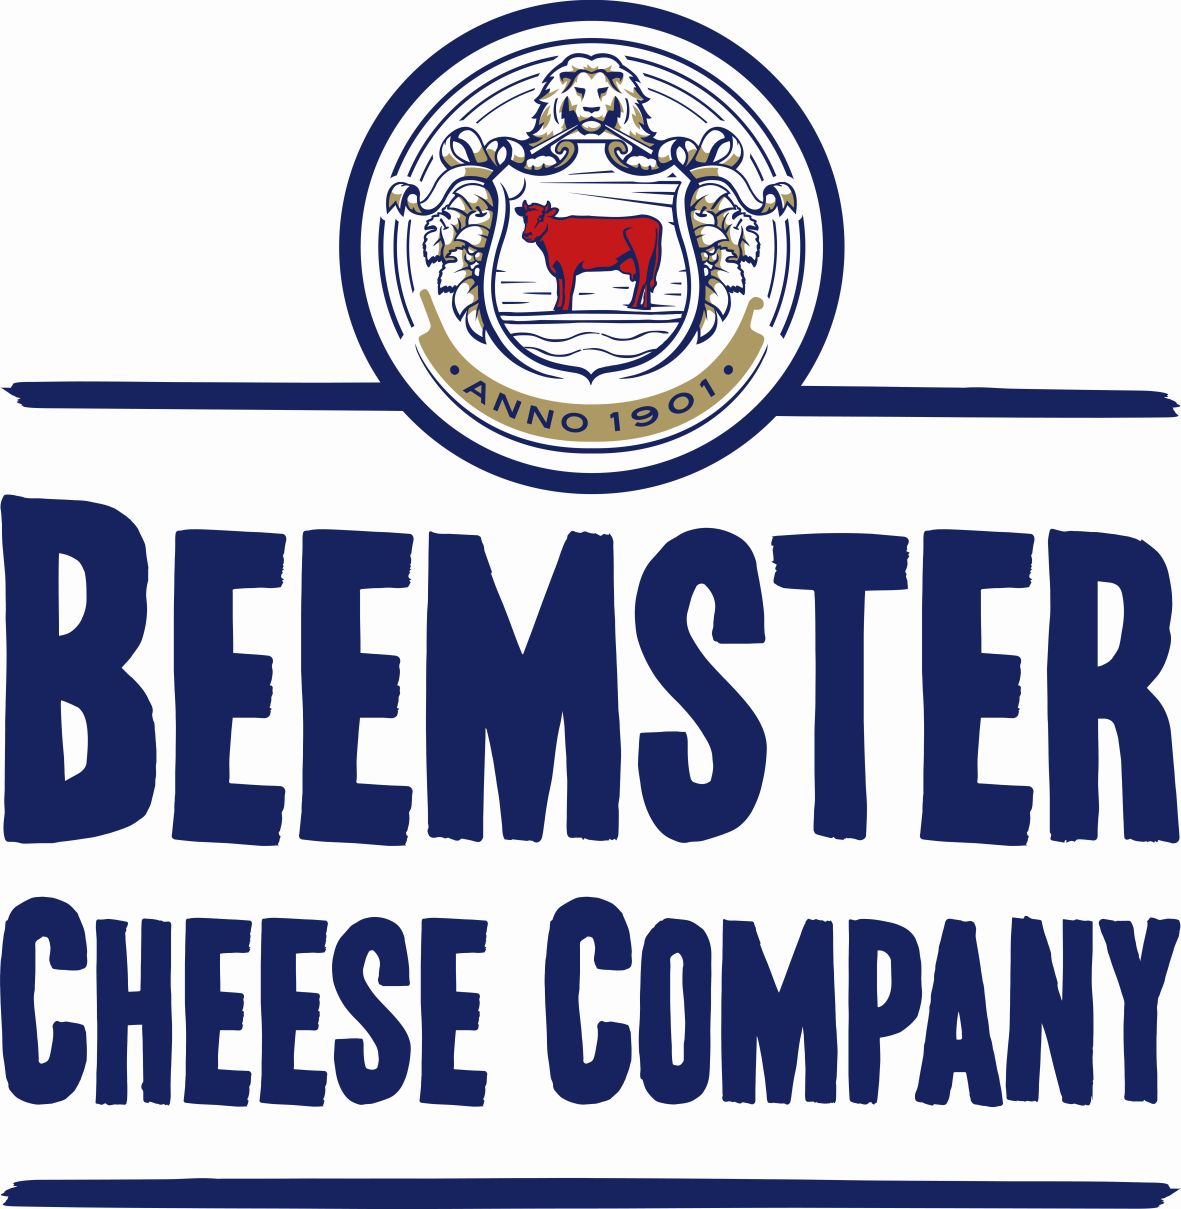 Beemster Cheese Company